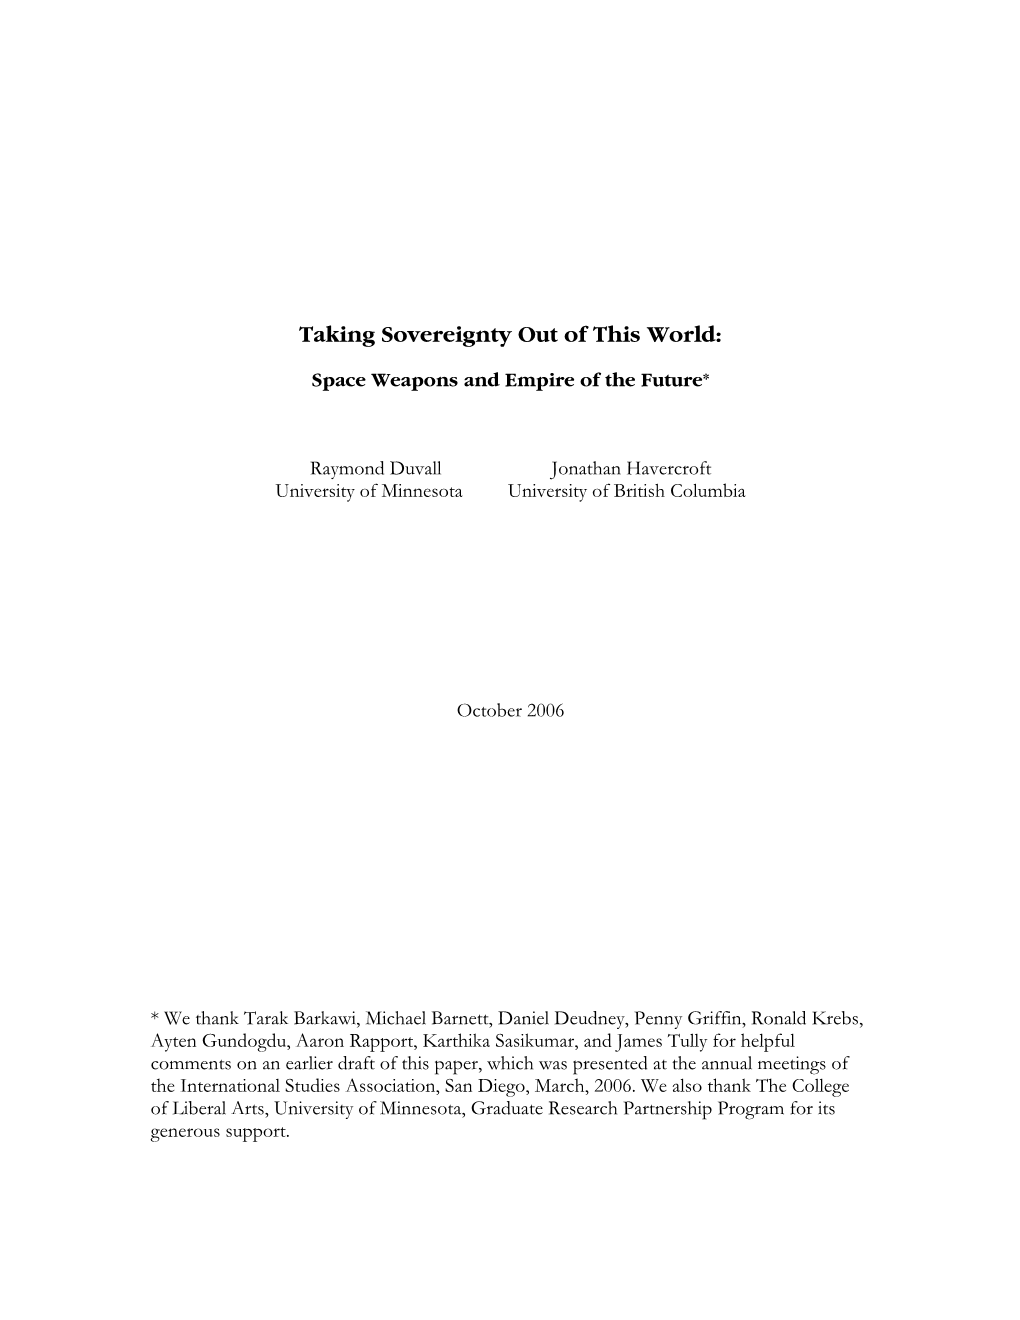 Taking Sovereignty out of This World: Space Weapons and Empire of The